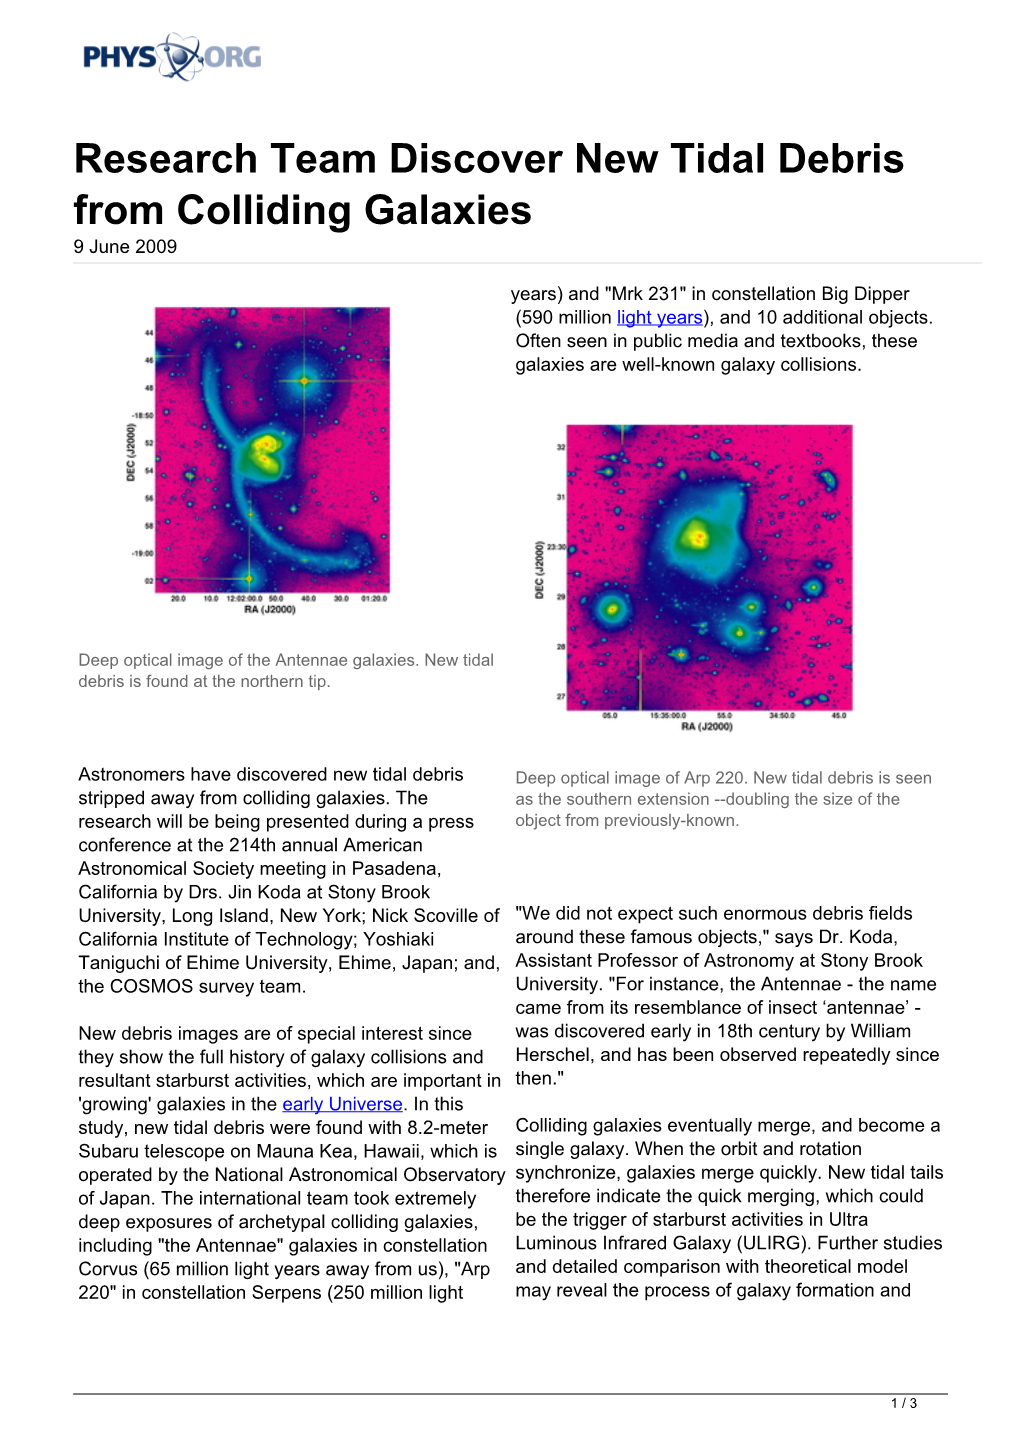 Research Team Discover New Tidal Debris from Colliding Galaxies 9 June 2009